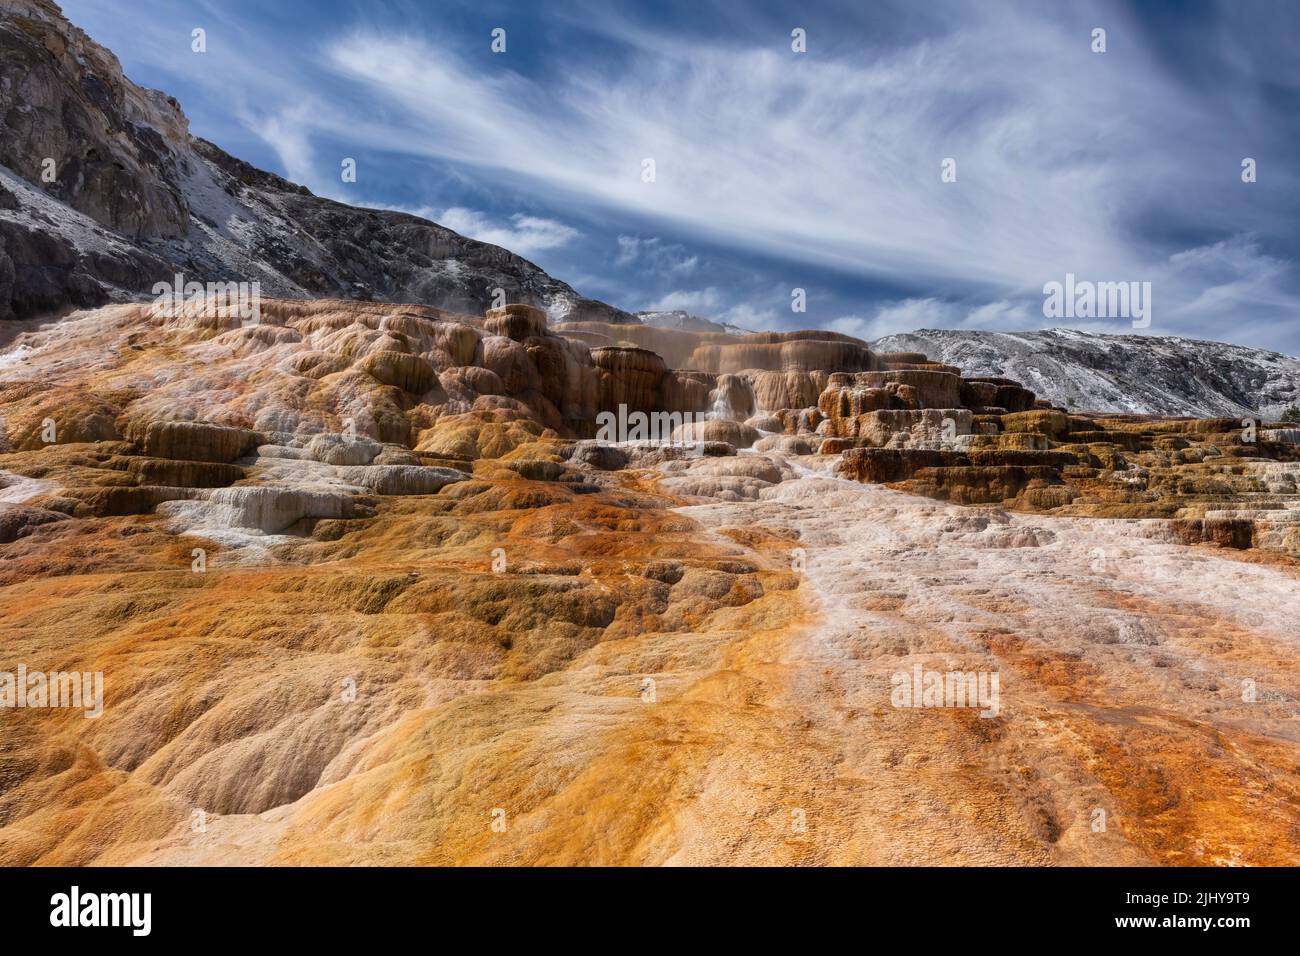 Mound Terrace, Mammoth Hot Springs, parc national de Yellowstone, Wyoming Banque D'Images